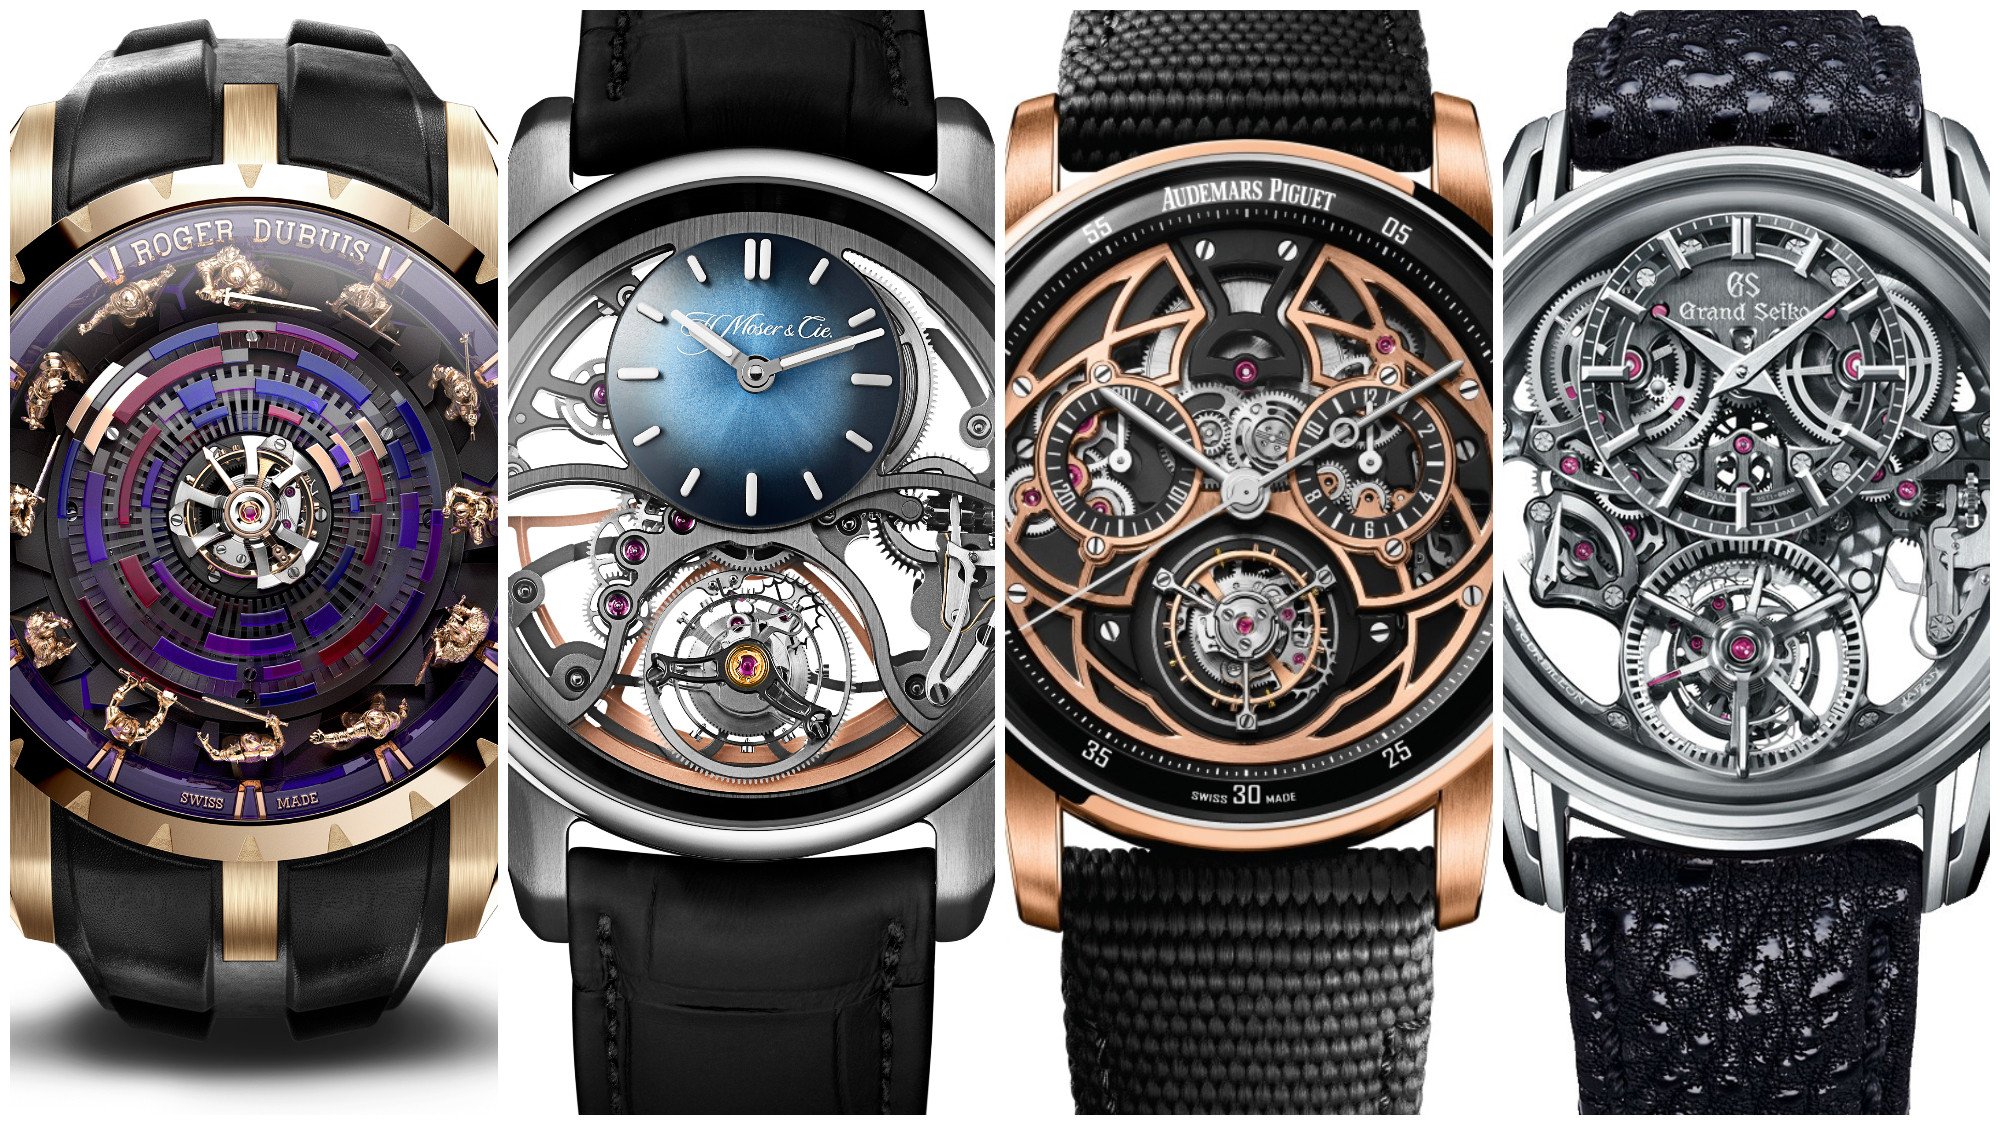 Read on to discover the most intricate watches of 2022 ... including these four stunning models. Photos: Handout